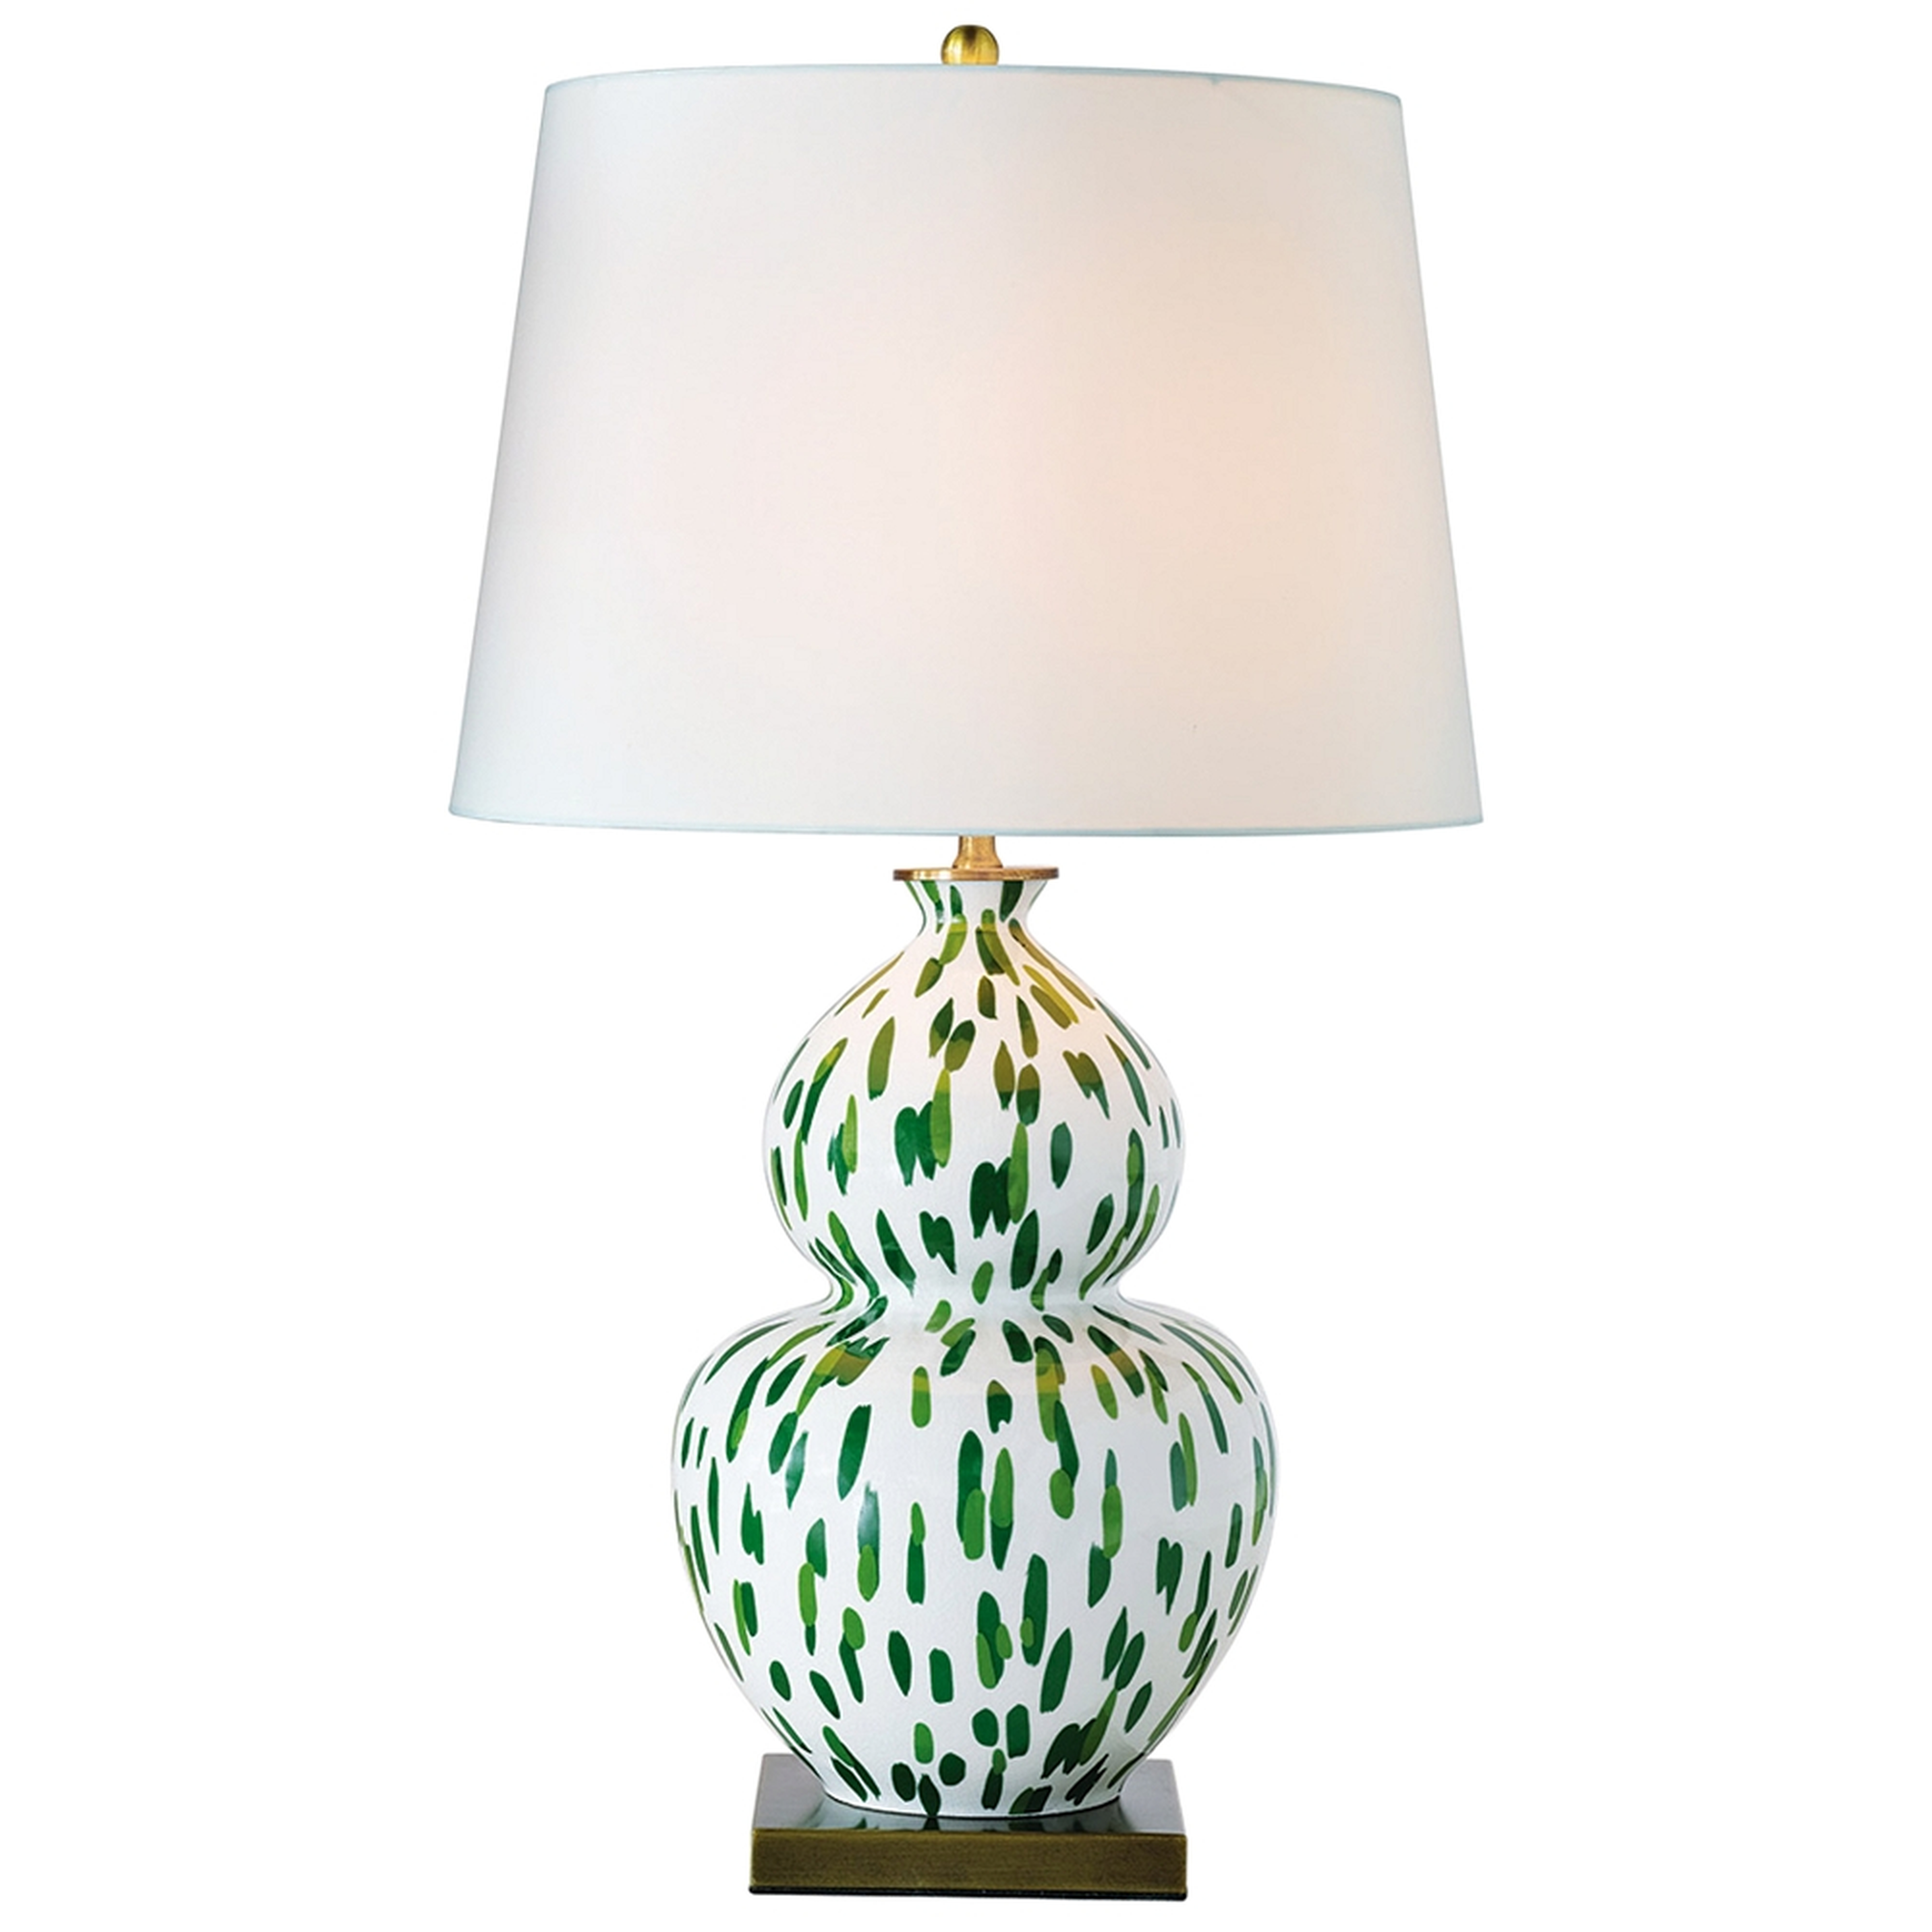 Port 68 Mill Reef Palm Double Gourd Porcelain Table Lamp - Style # 64W64 - Lamps Plus